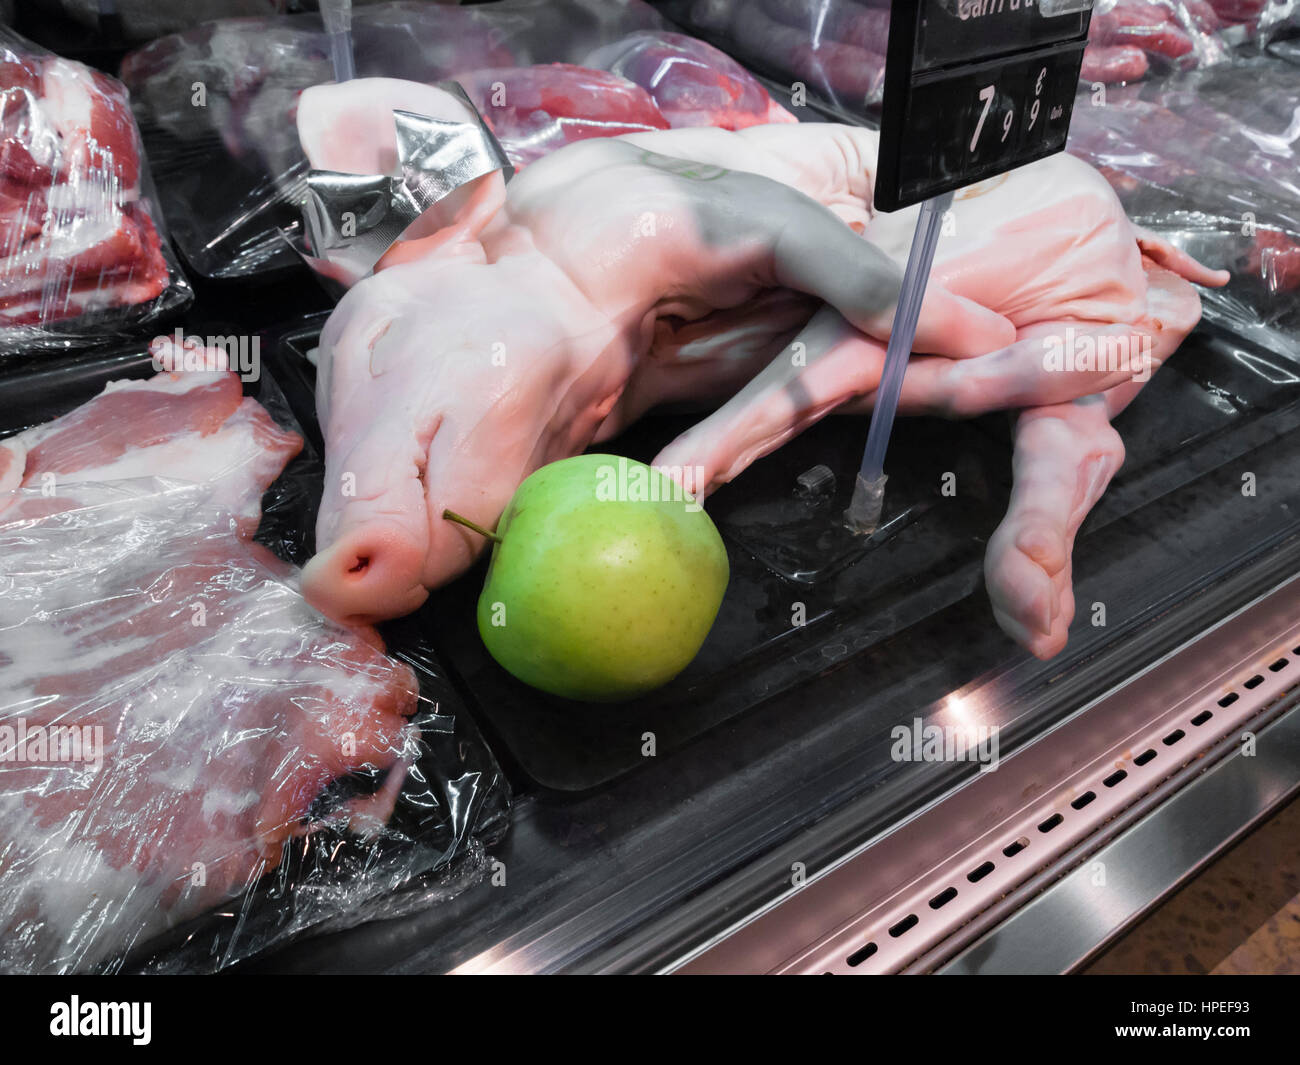 A whole piglet is displayed for sale in a refrigerator at a supermarket in Barcelona, Spain. Stock Photo